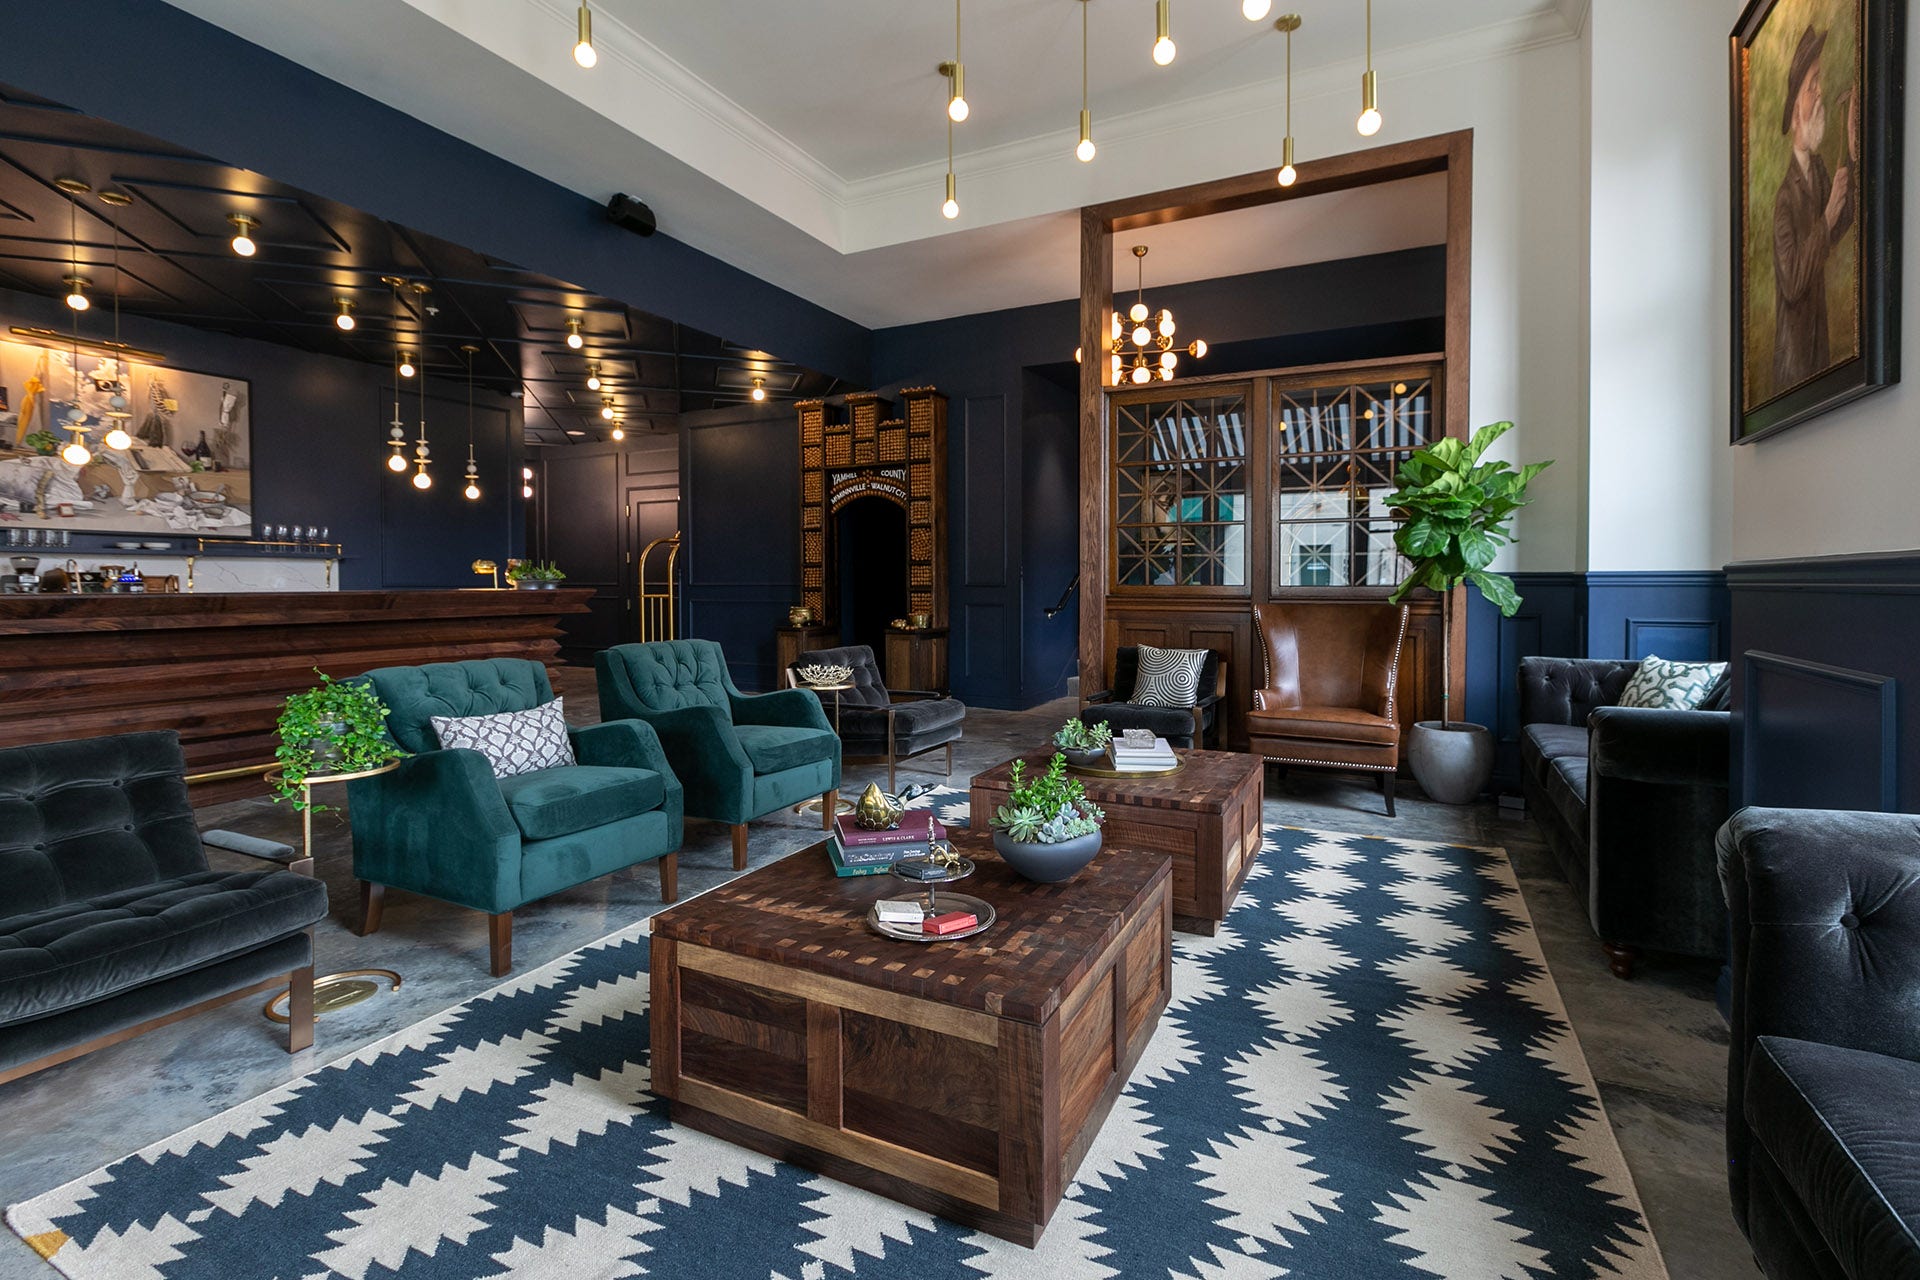 Dark blue interior with dark wood, velvet seating and a blue and white patterned rug